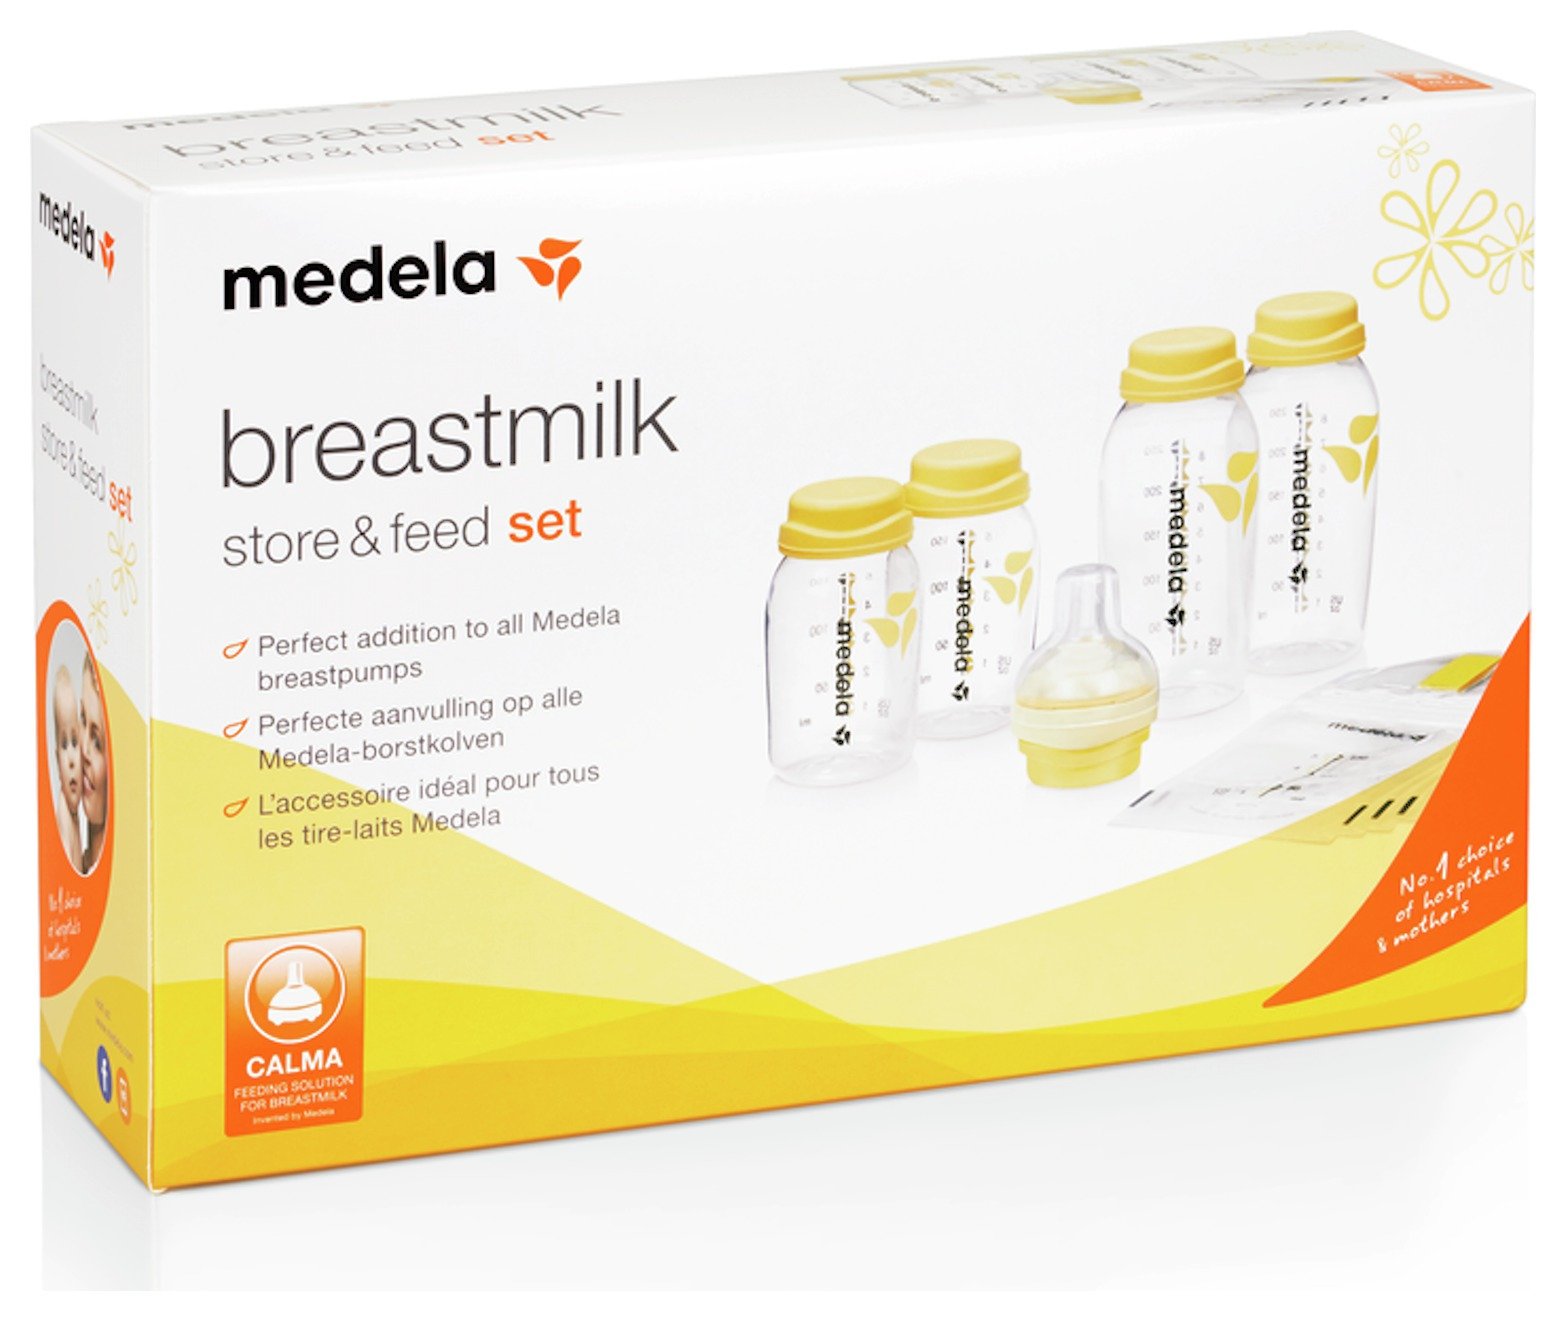 Medela Store and Feed Set. Review